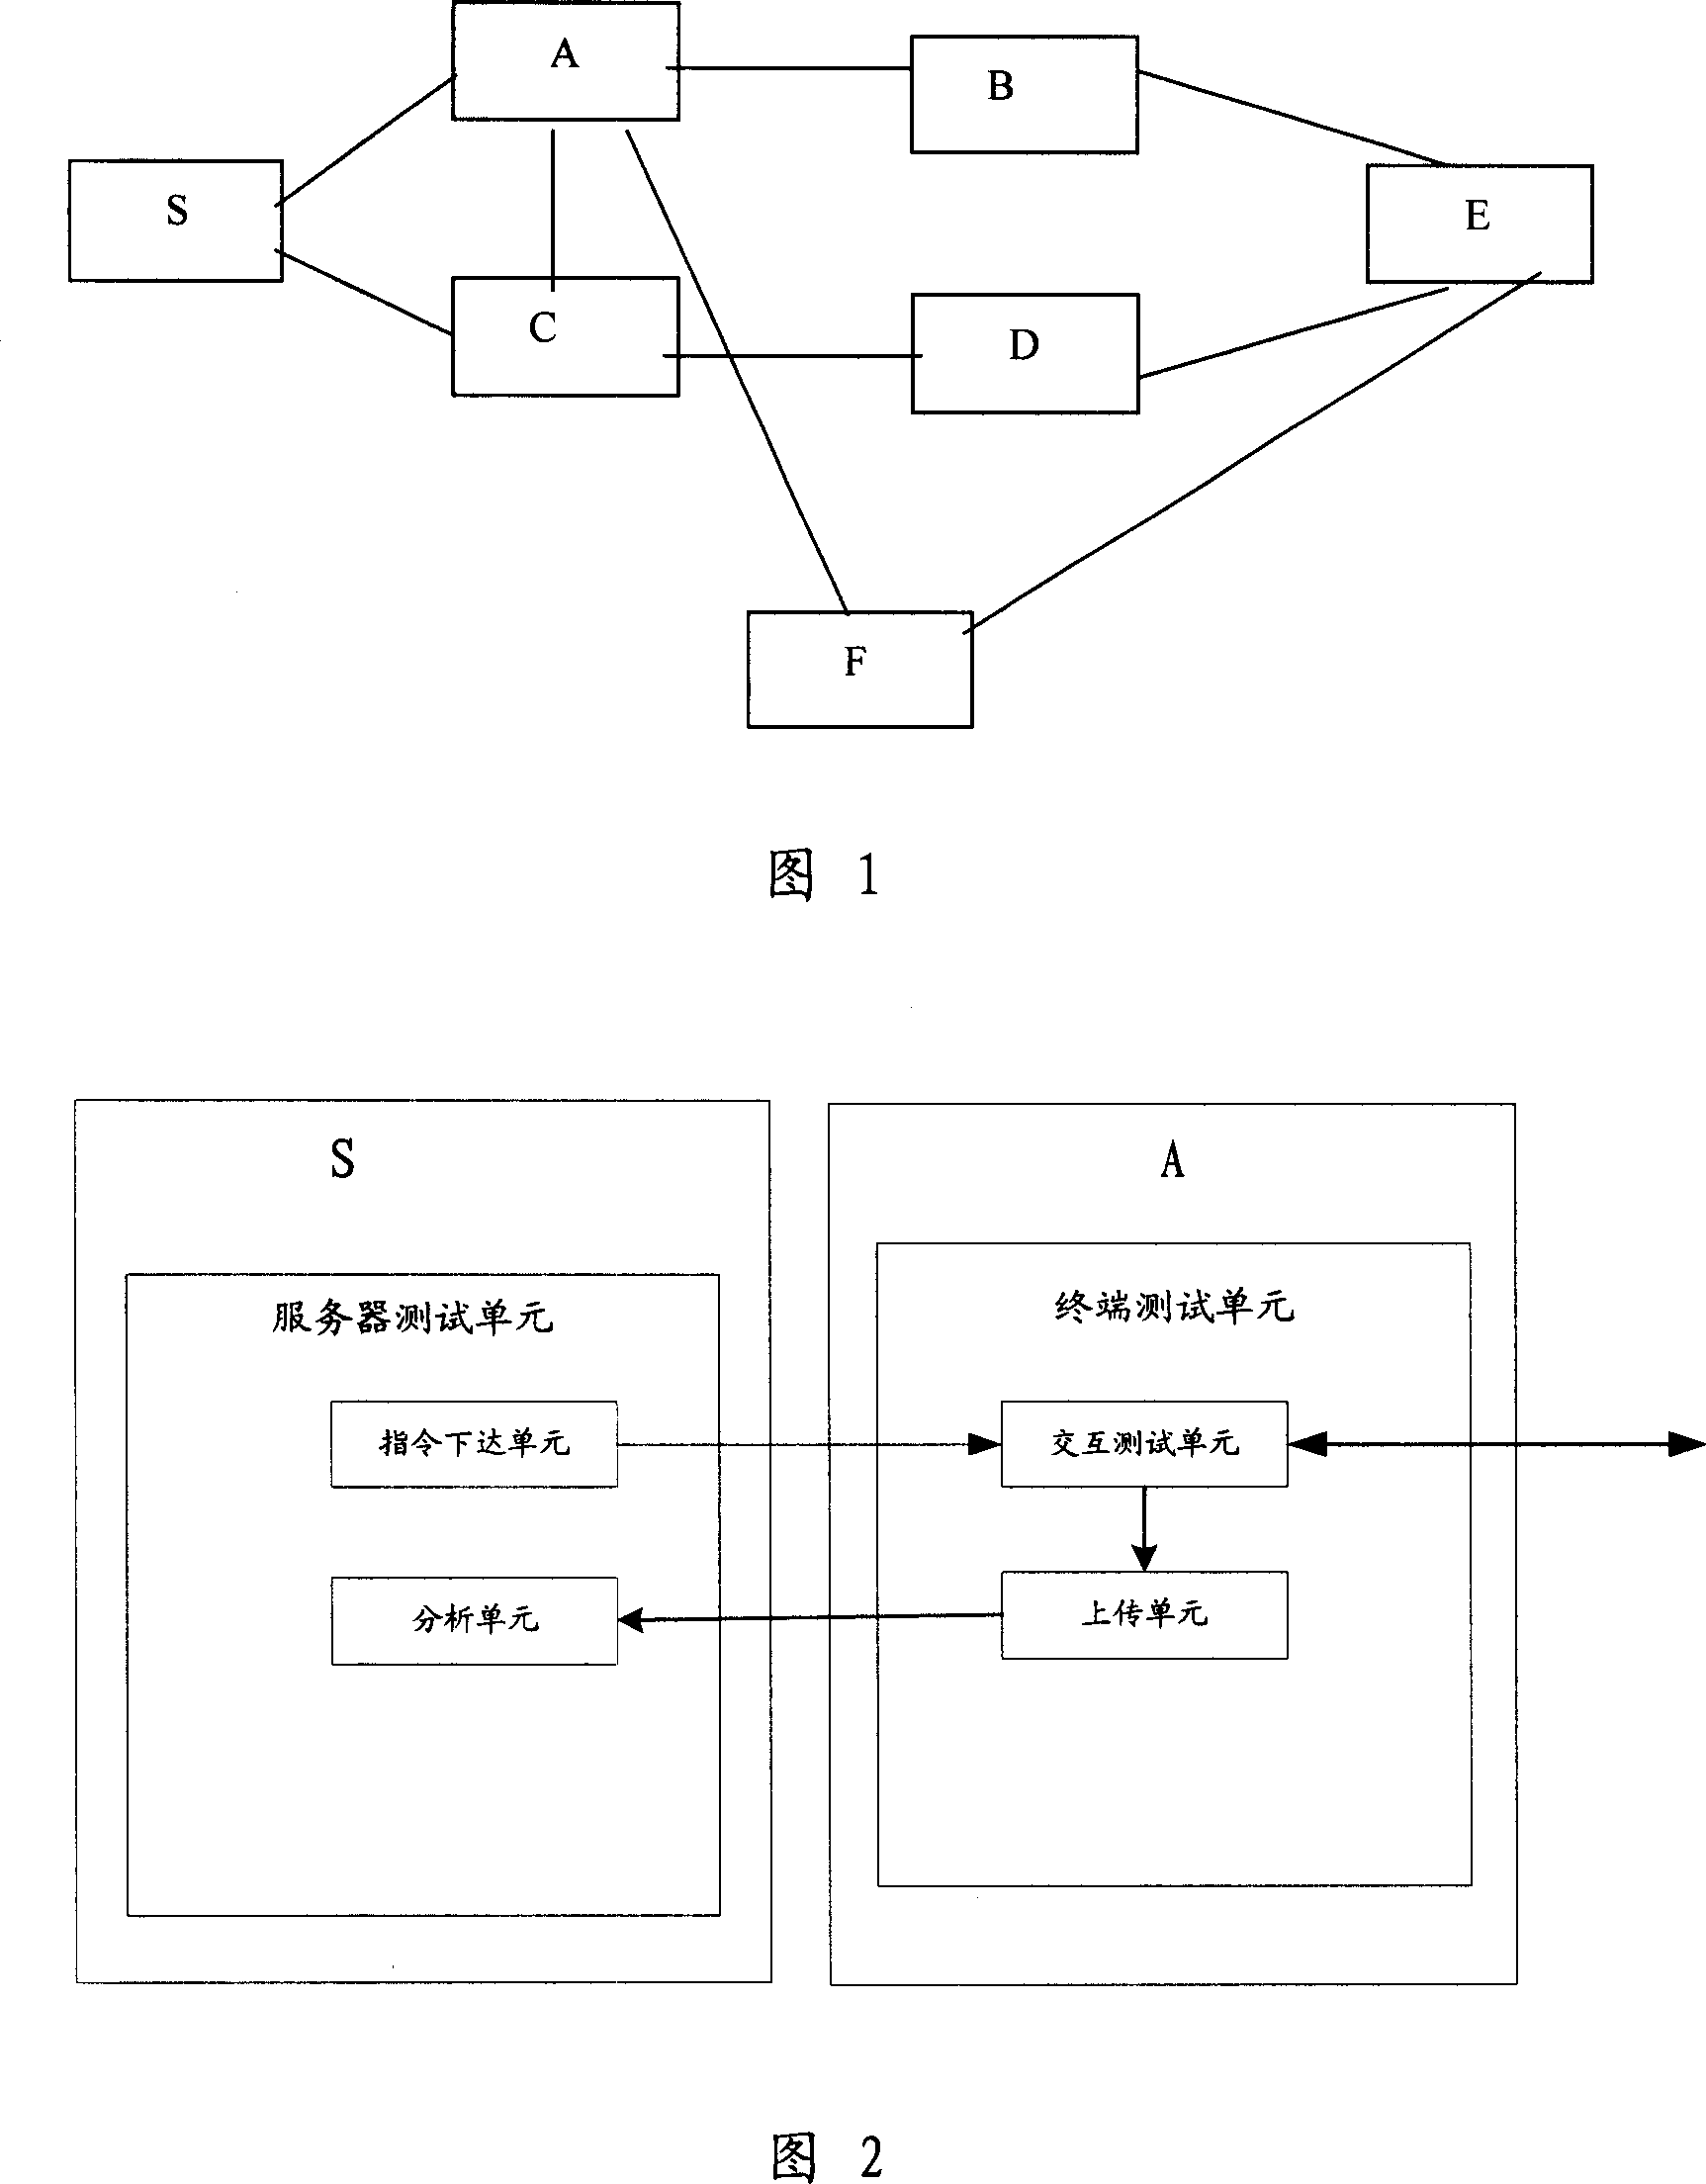 Method and system for on-line testing data network quality